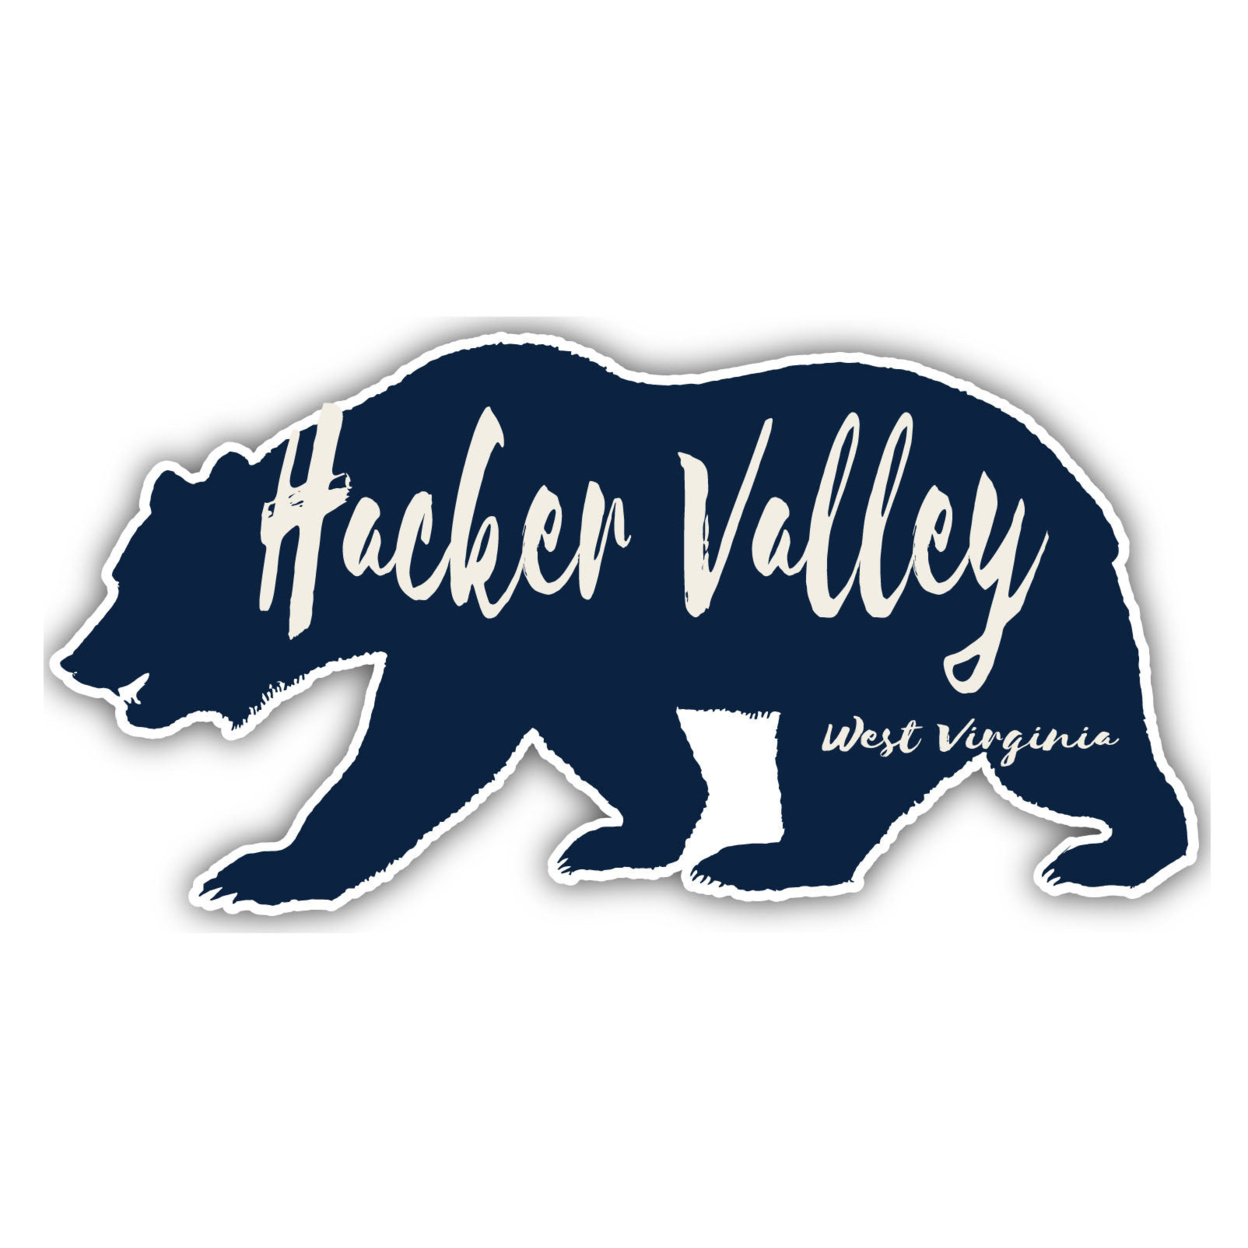 Hacker Valley West Virginia Souvenir Decorative Stickers (Choose Theme And Size) - 4-Pack, 8-Inch, Bear